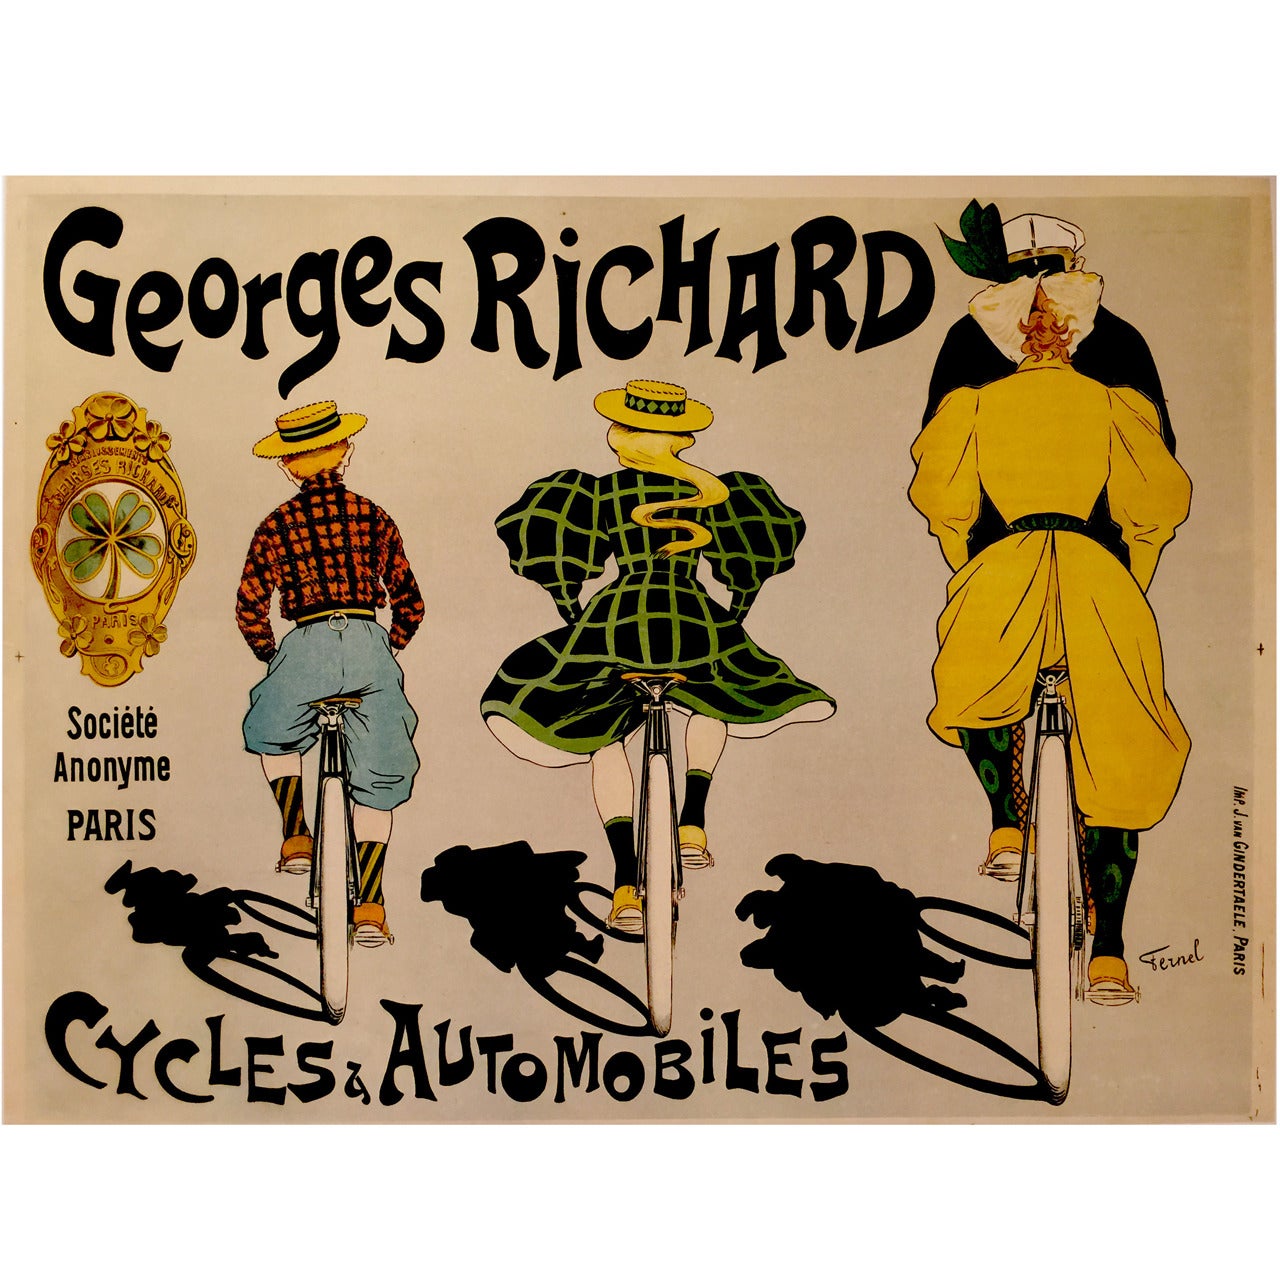 French Belle Epoque Period Poster for Georges Richard by Fernand Fernel, 1896